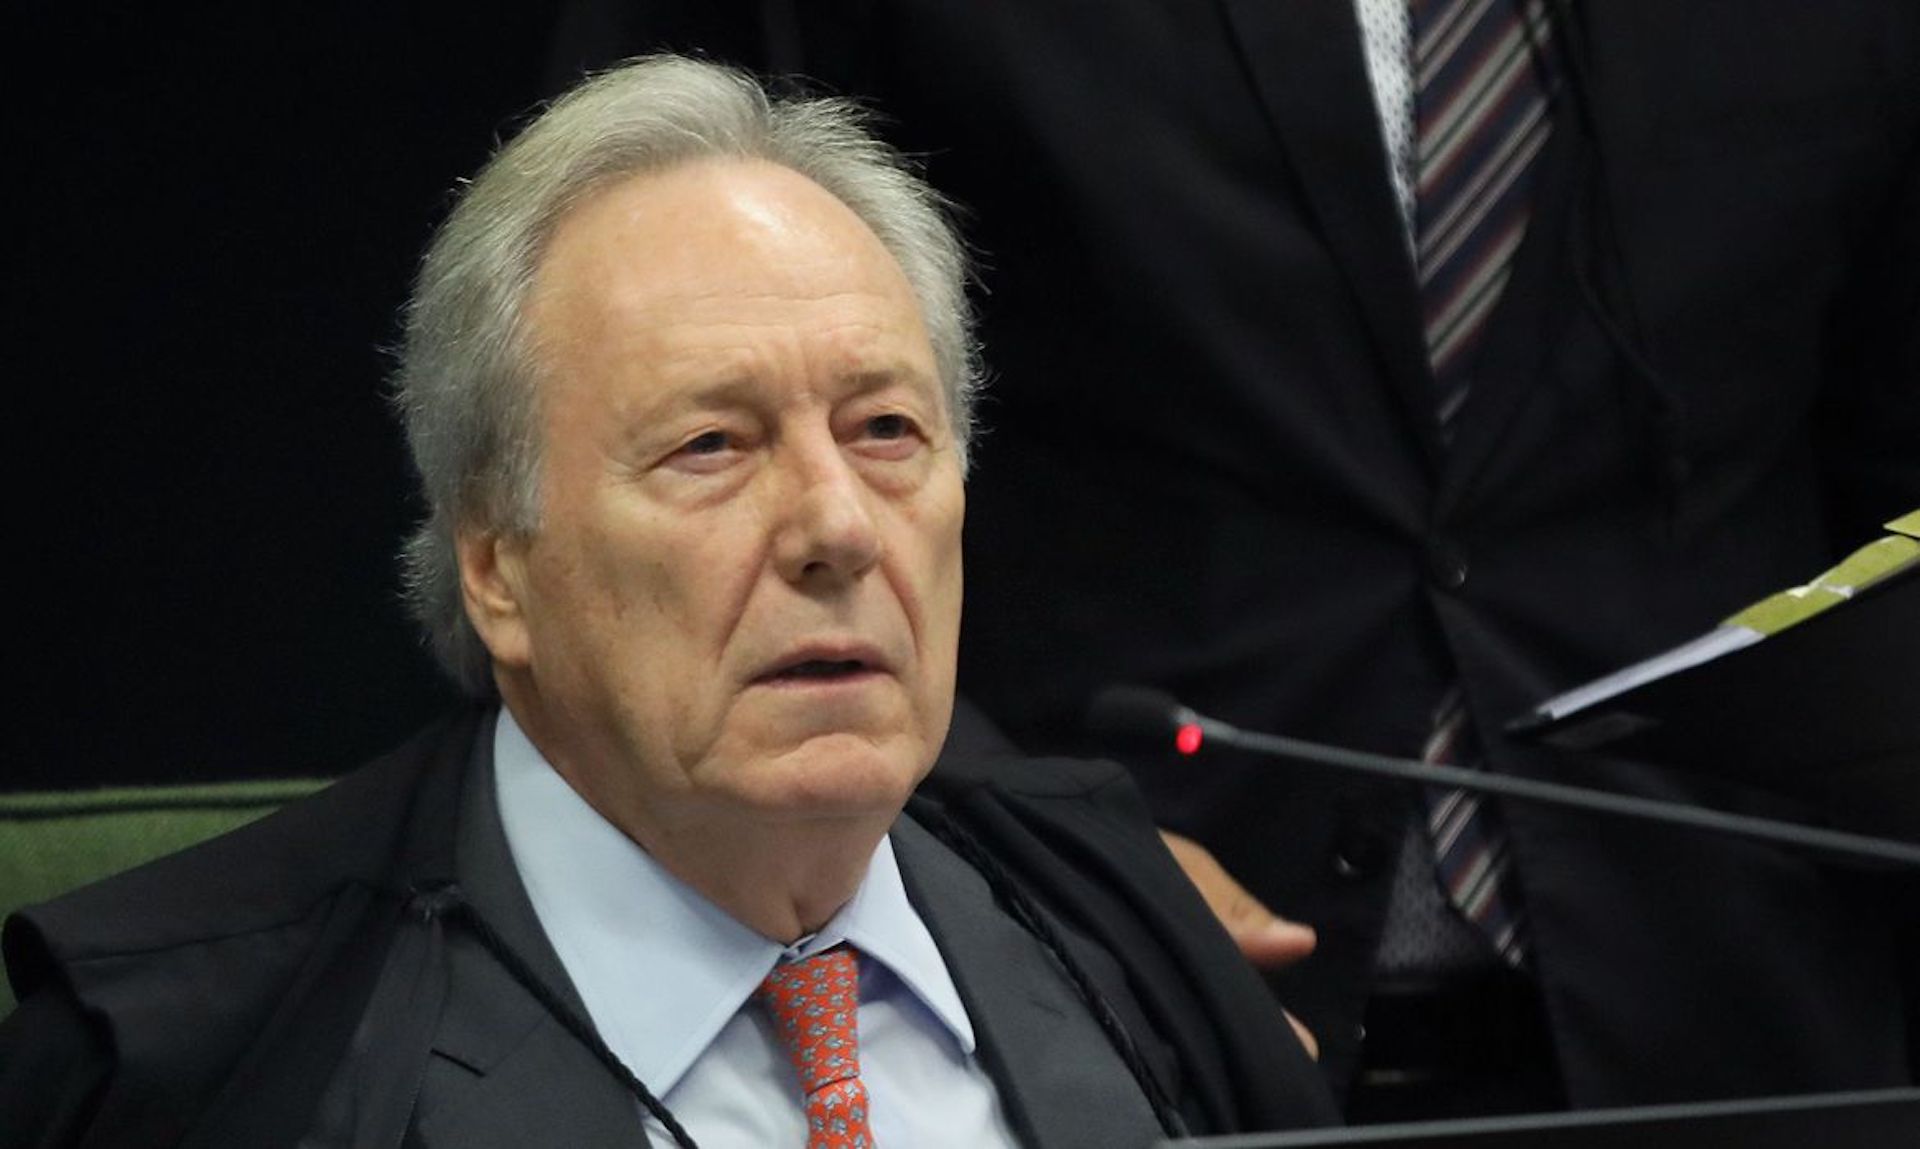 Brazil,Supreme Court Justice Ricardo Lewandowski ruled that campaign funds given to political parties must be divided between black and white candidates.